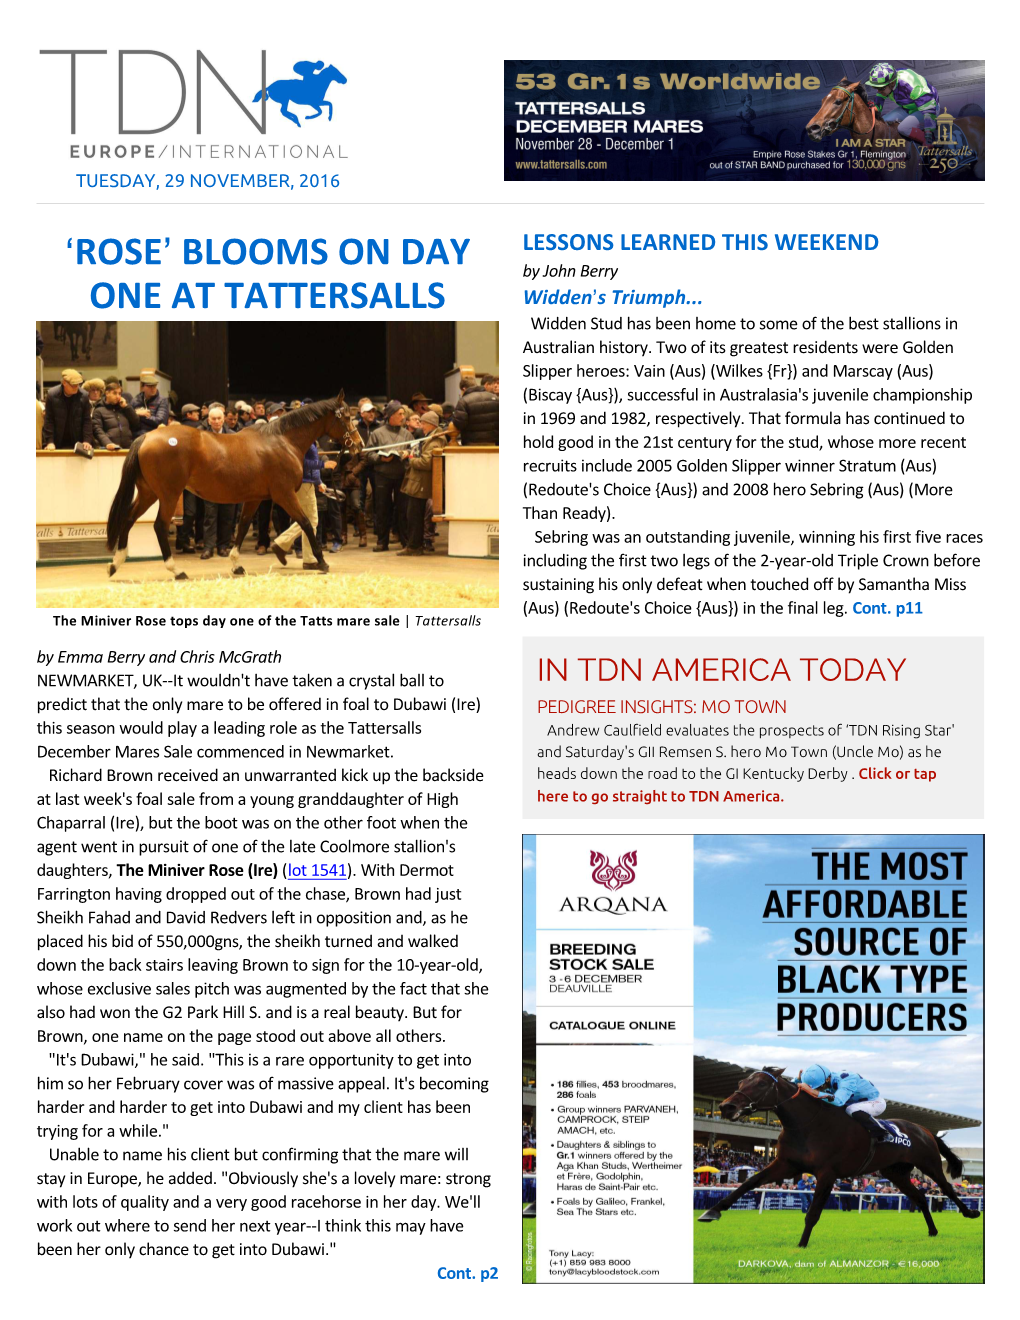 Rose= Blooms on Day One at Tattersalls Cont